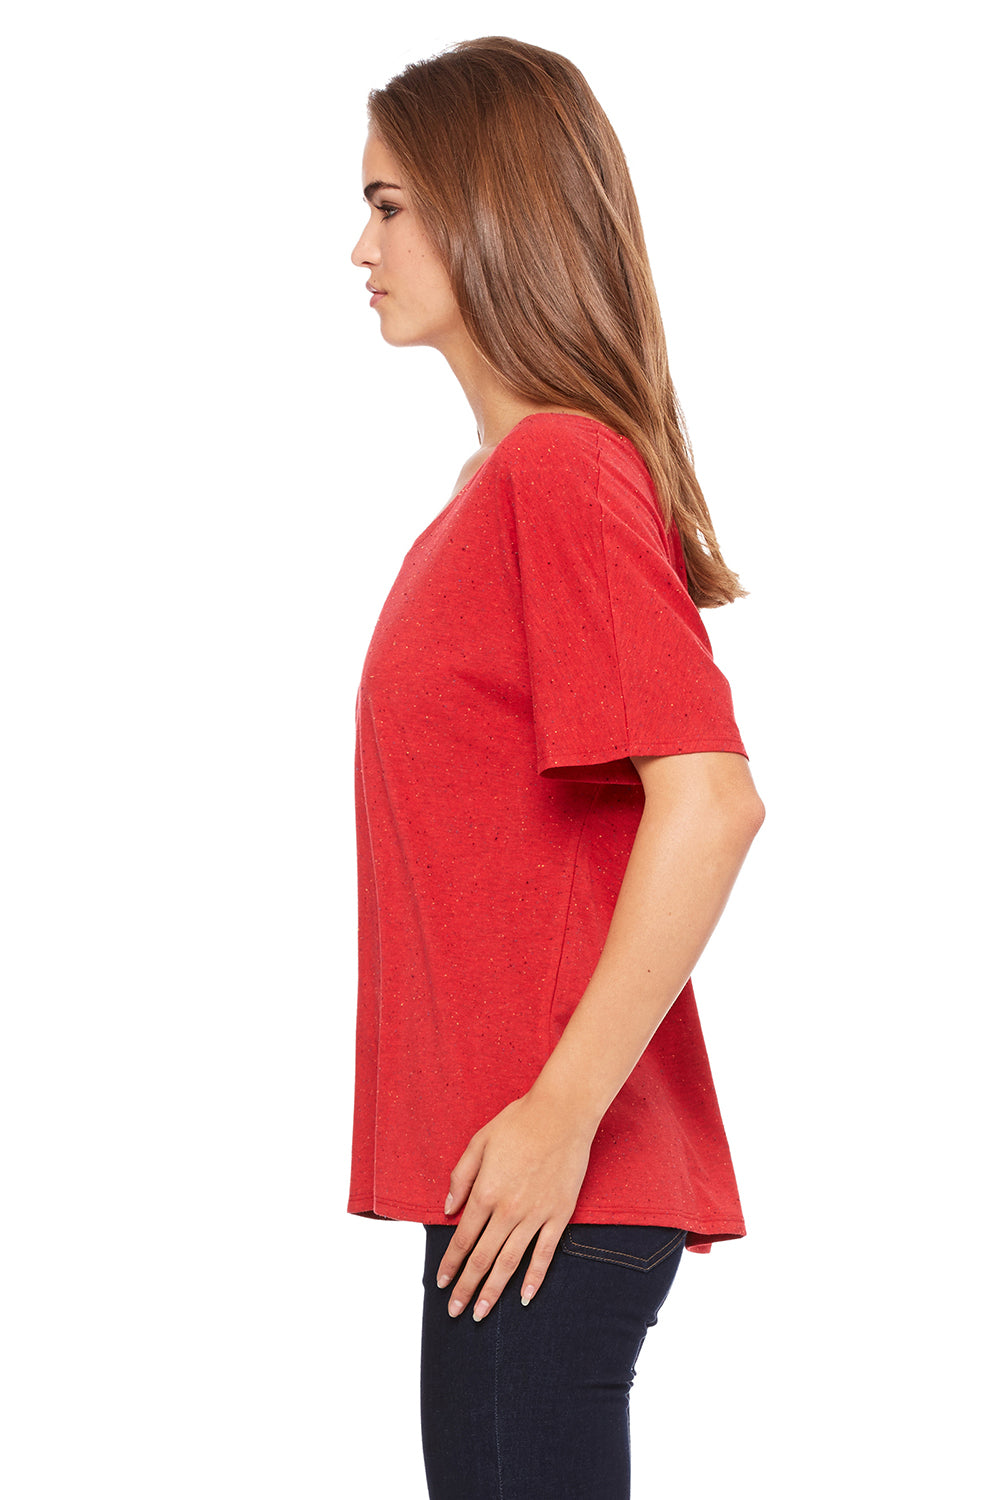 Bella + Canvas 8816 Womens Slouchy Short Sleeve Wide Neck T-Shirt Red Speckled Side